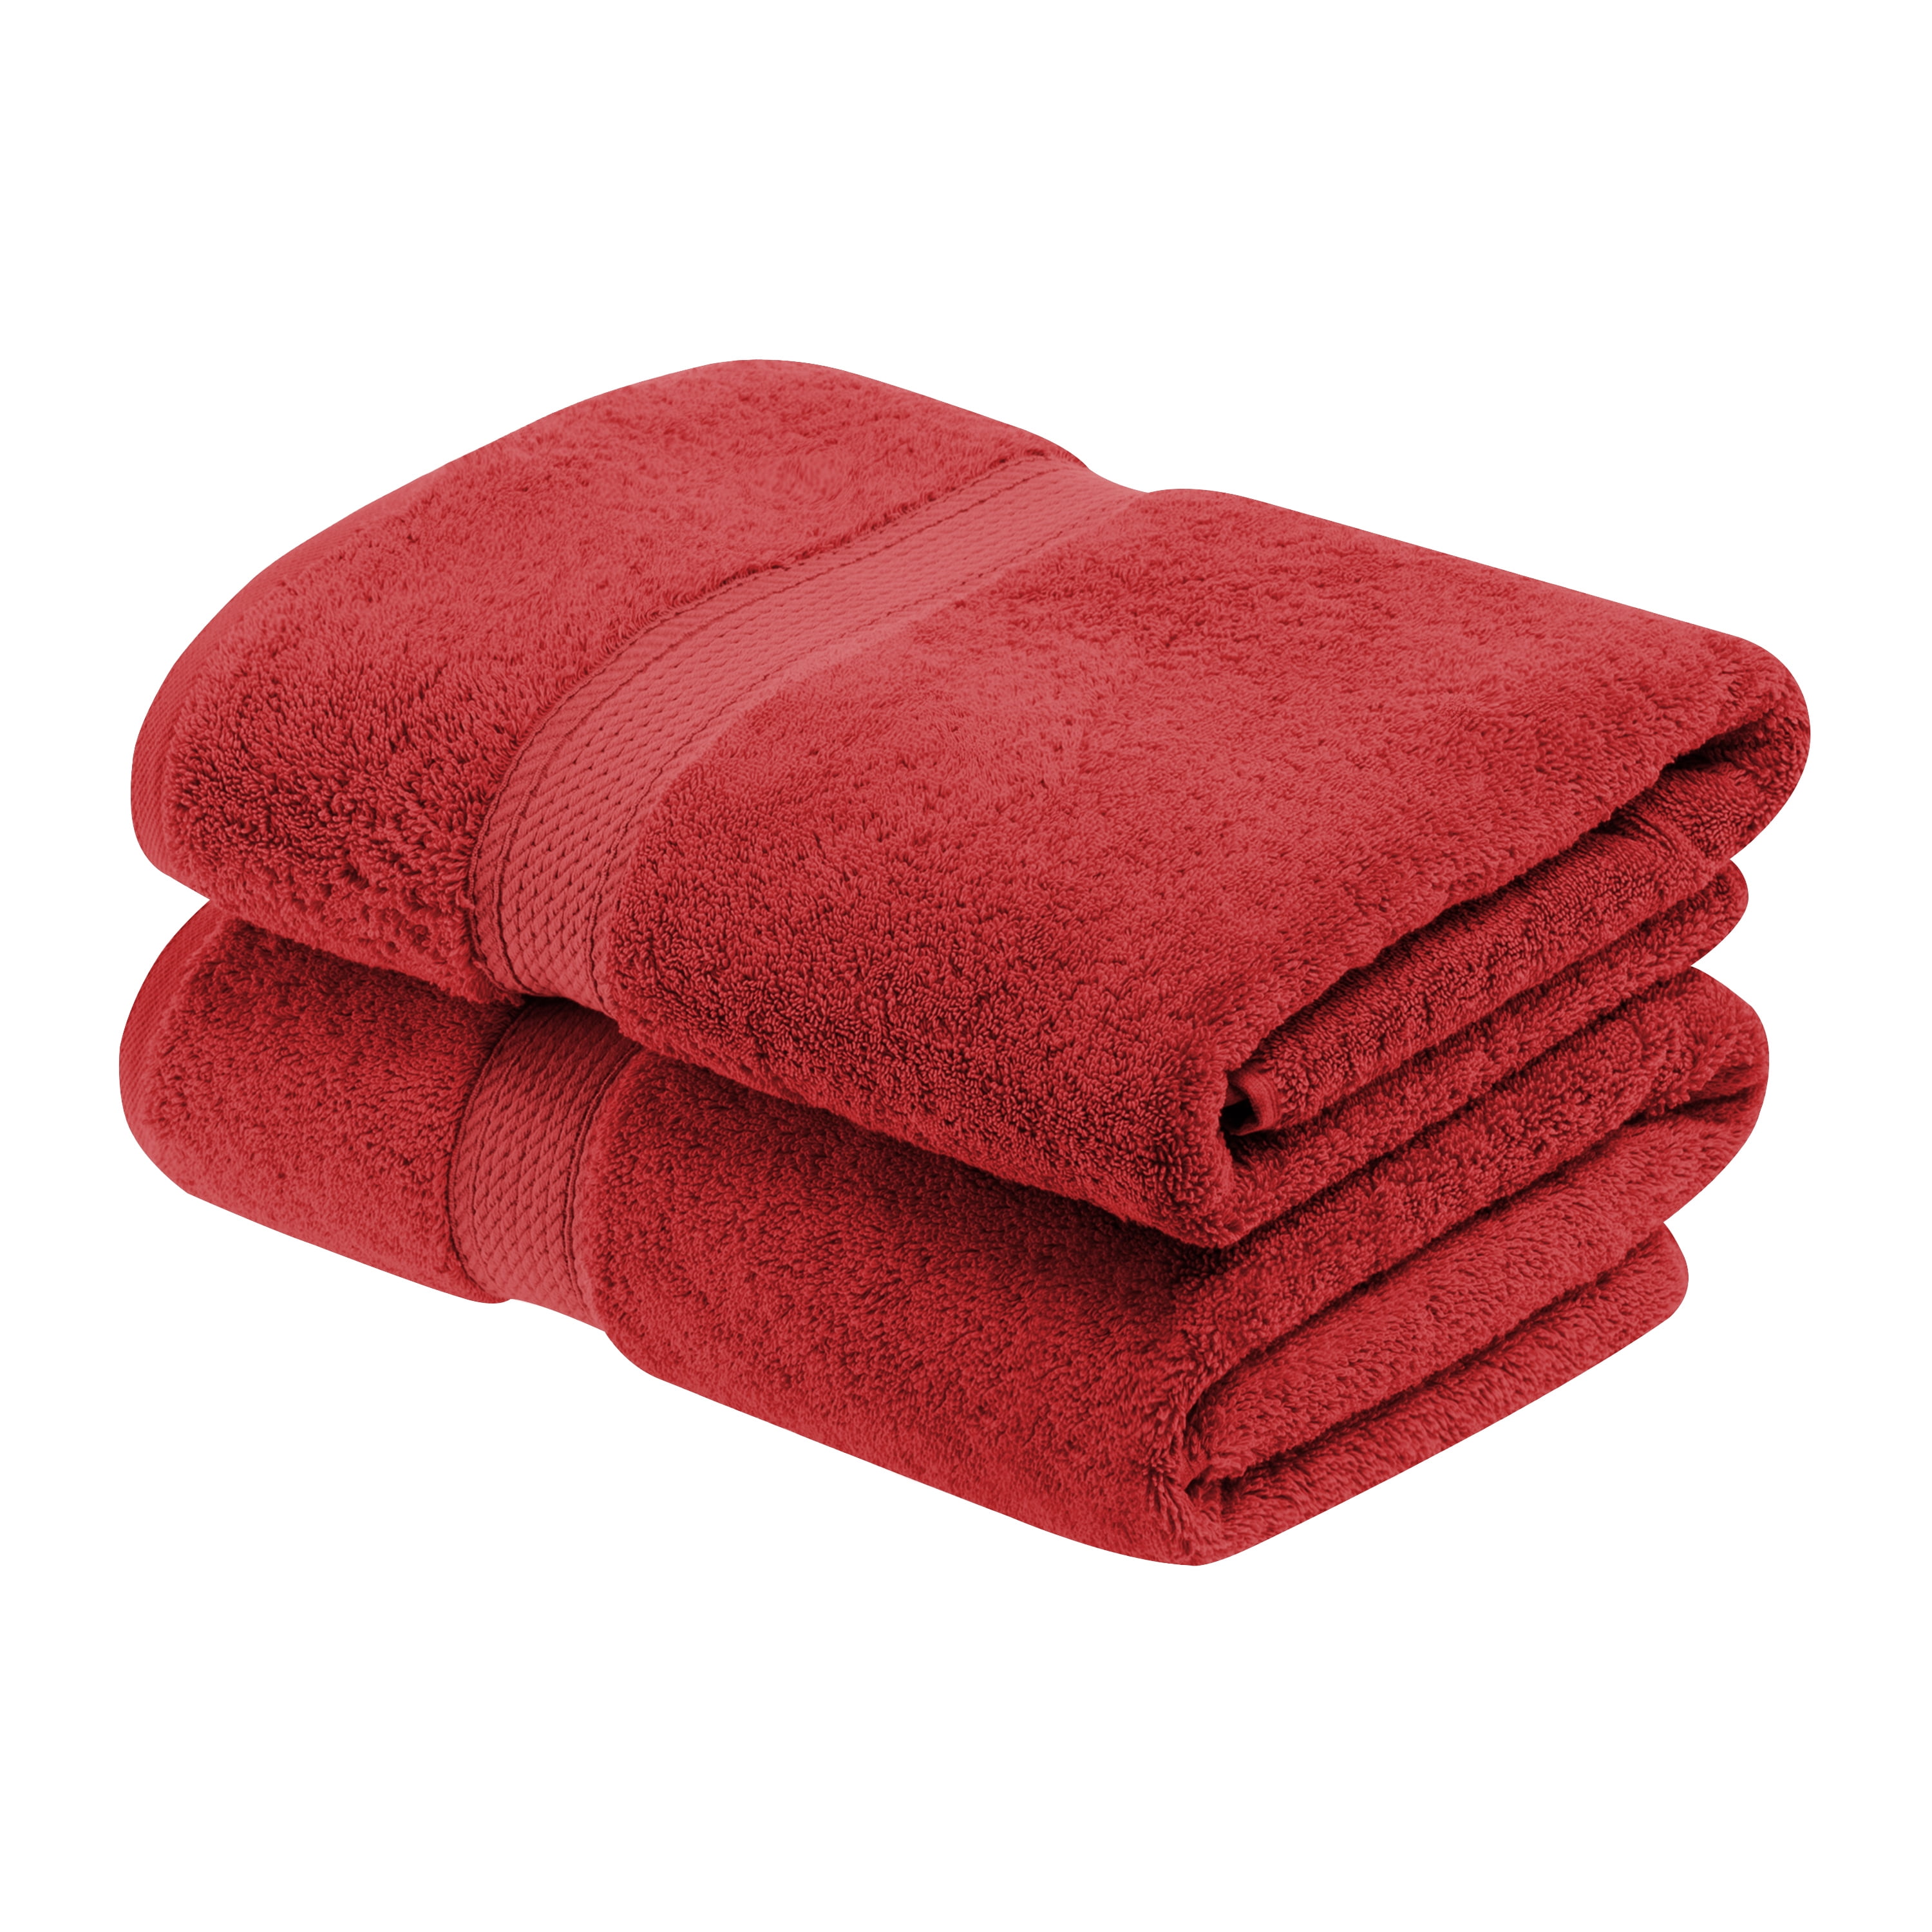 2  Piece Bath Towel 900 GSM  Egpyptian Cotton   28 x 55 inches  Free Shipping 